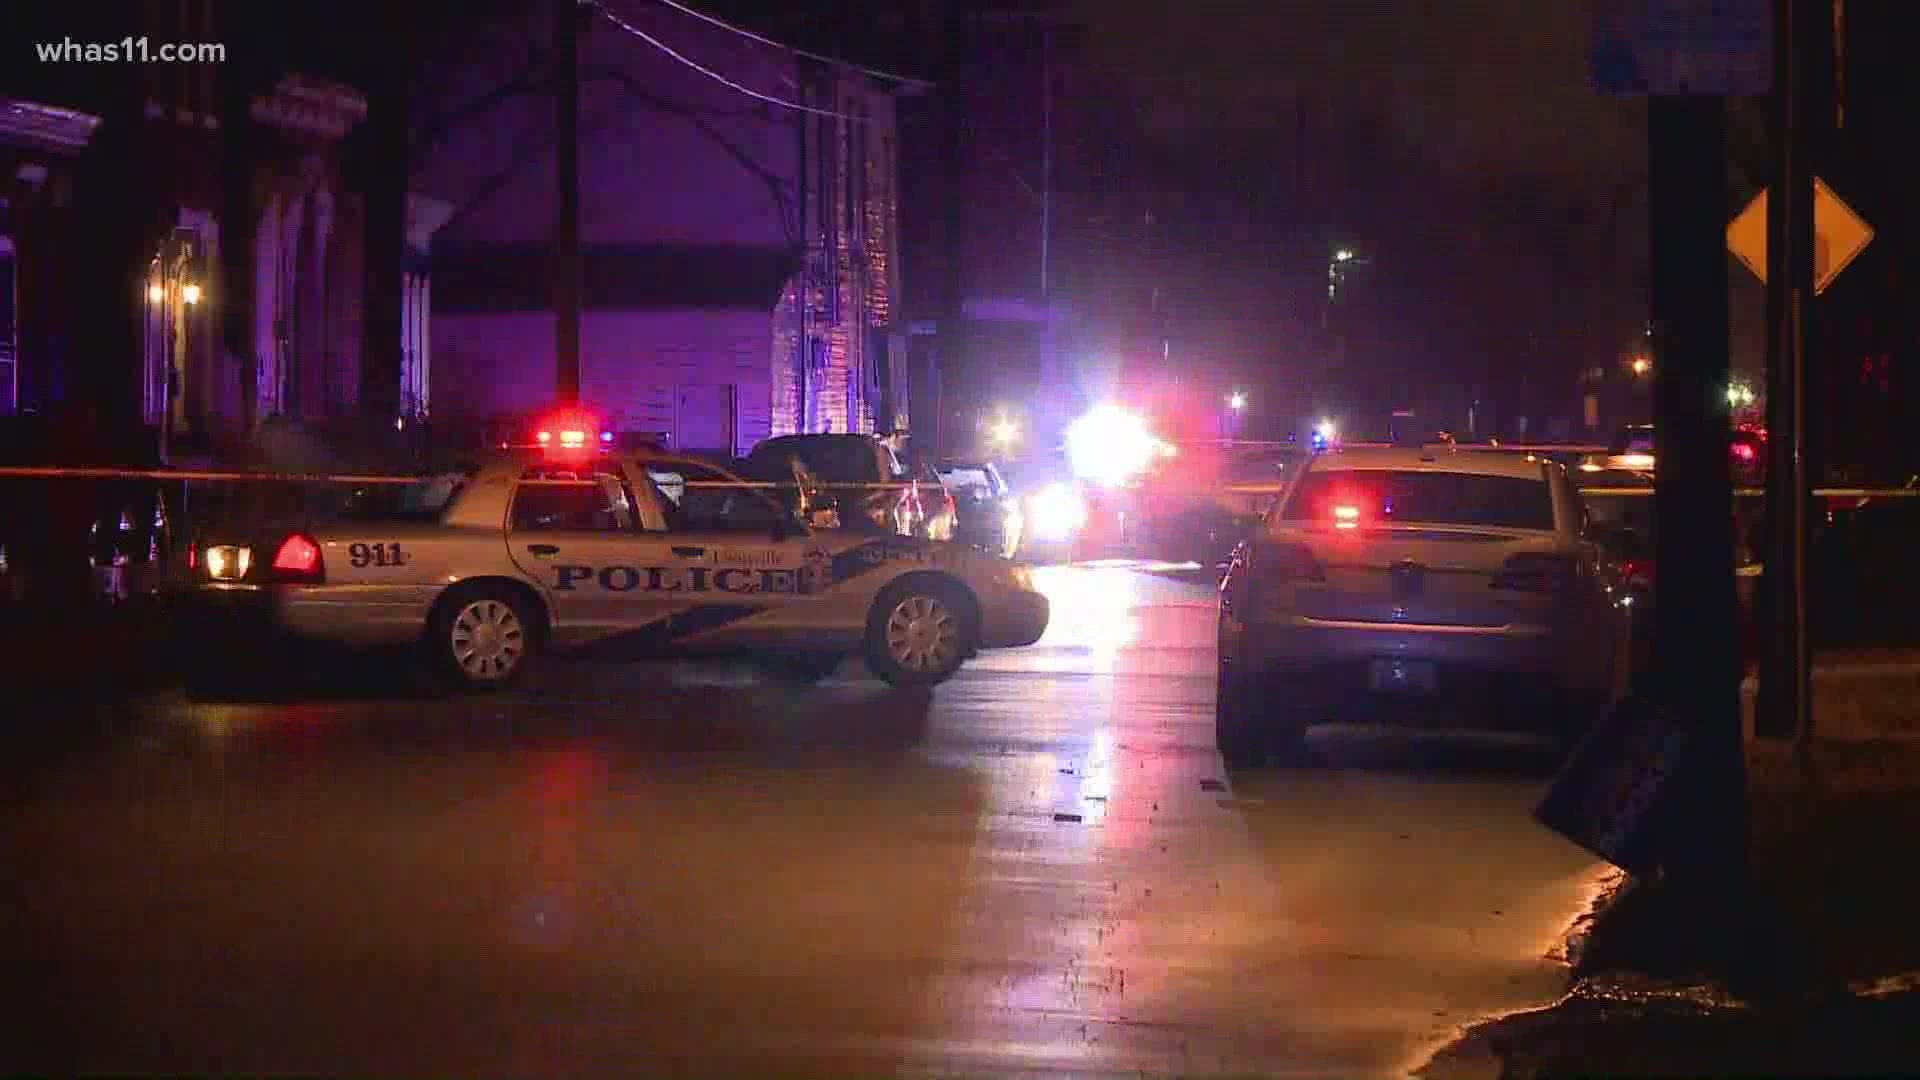 A man and a woman were found dead inside a vehicle around 4:30 a.m. on New Year's Eve.